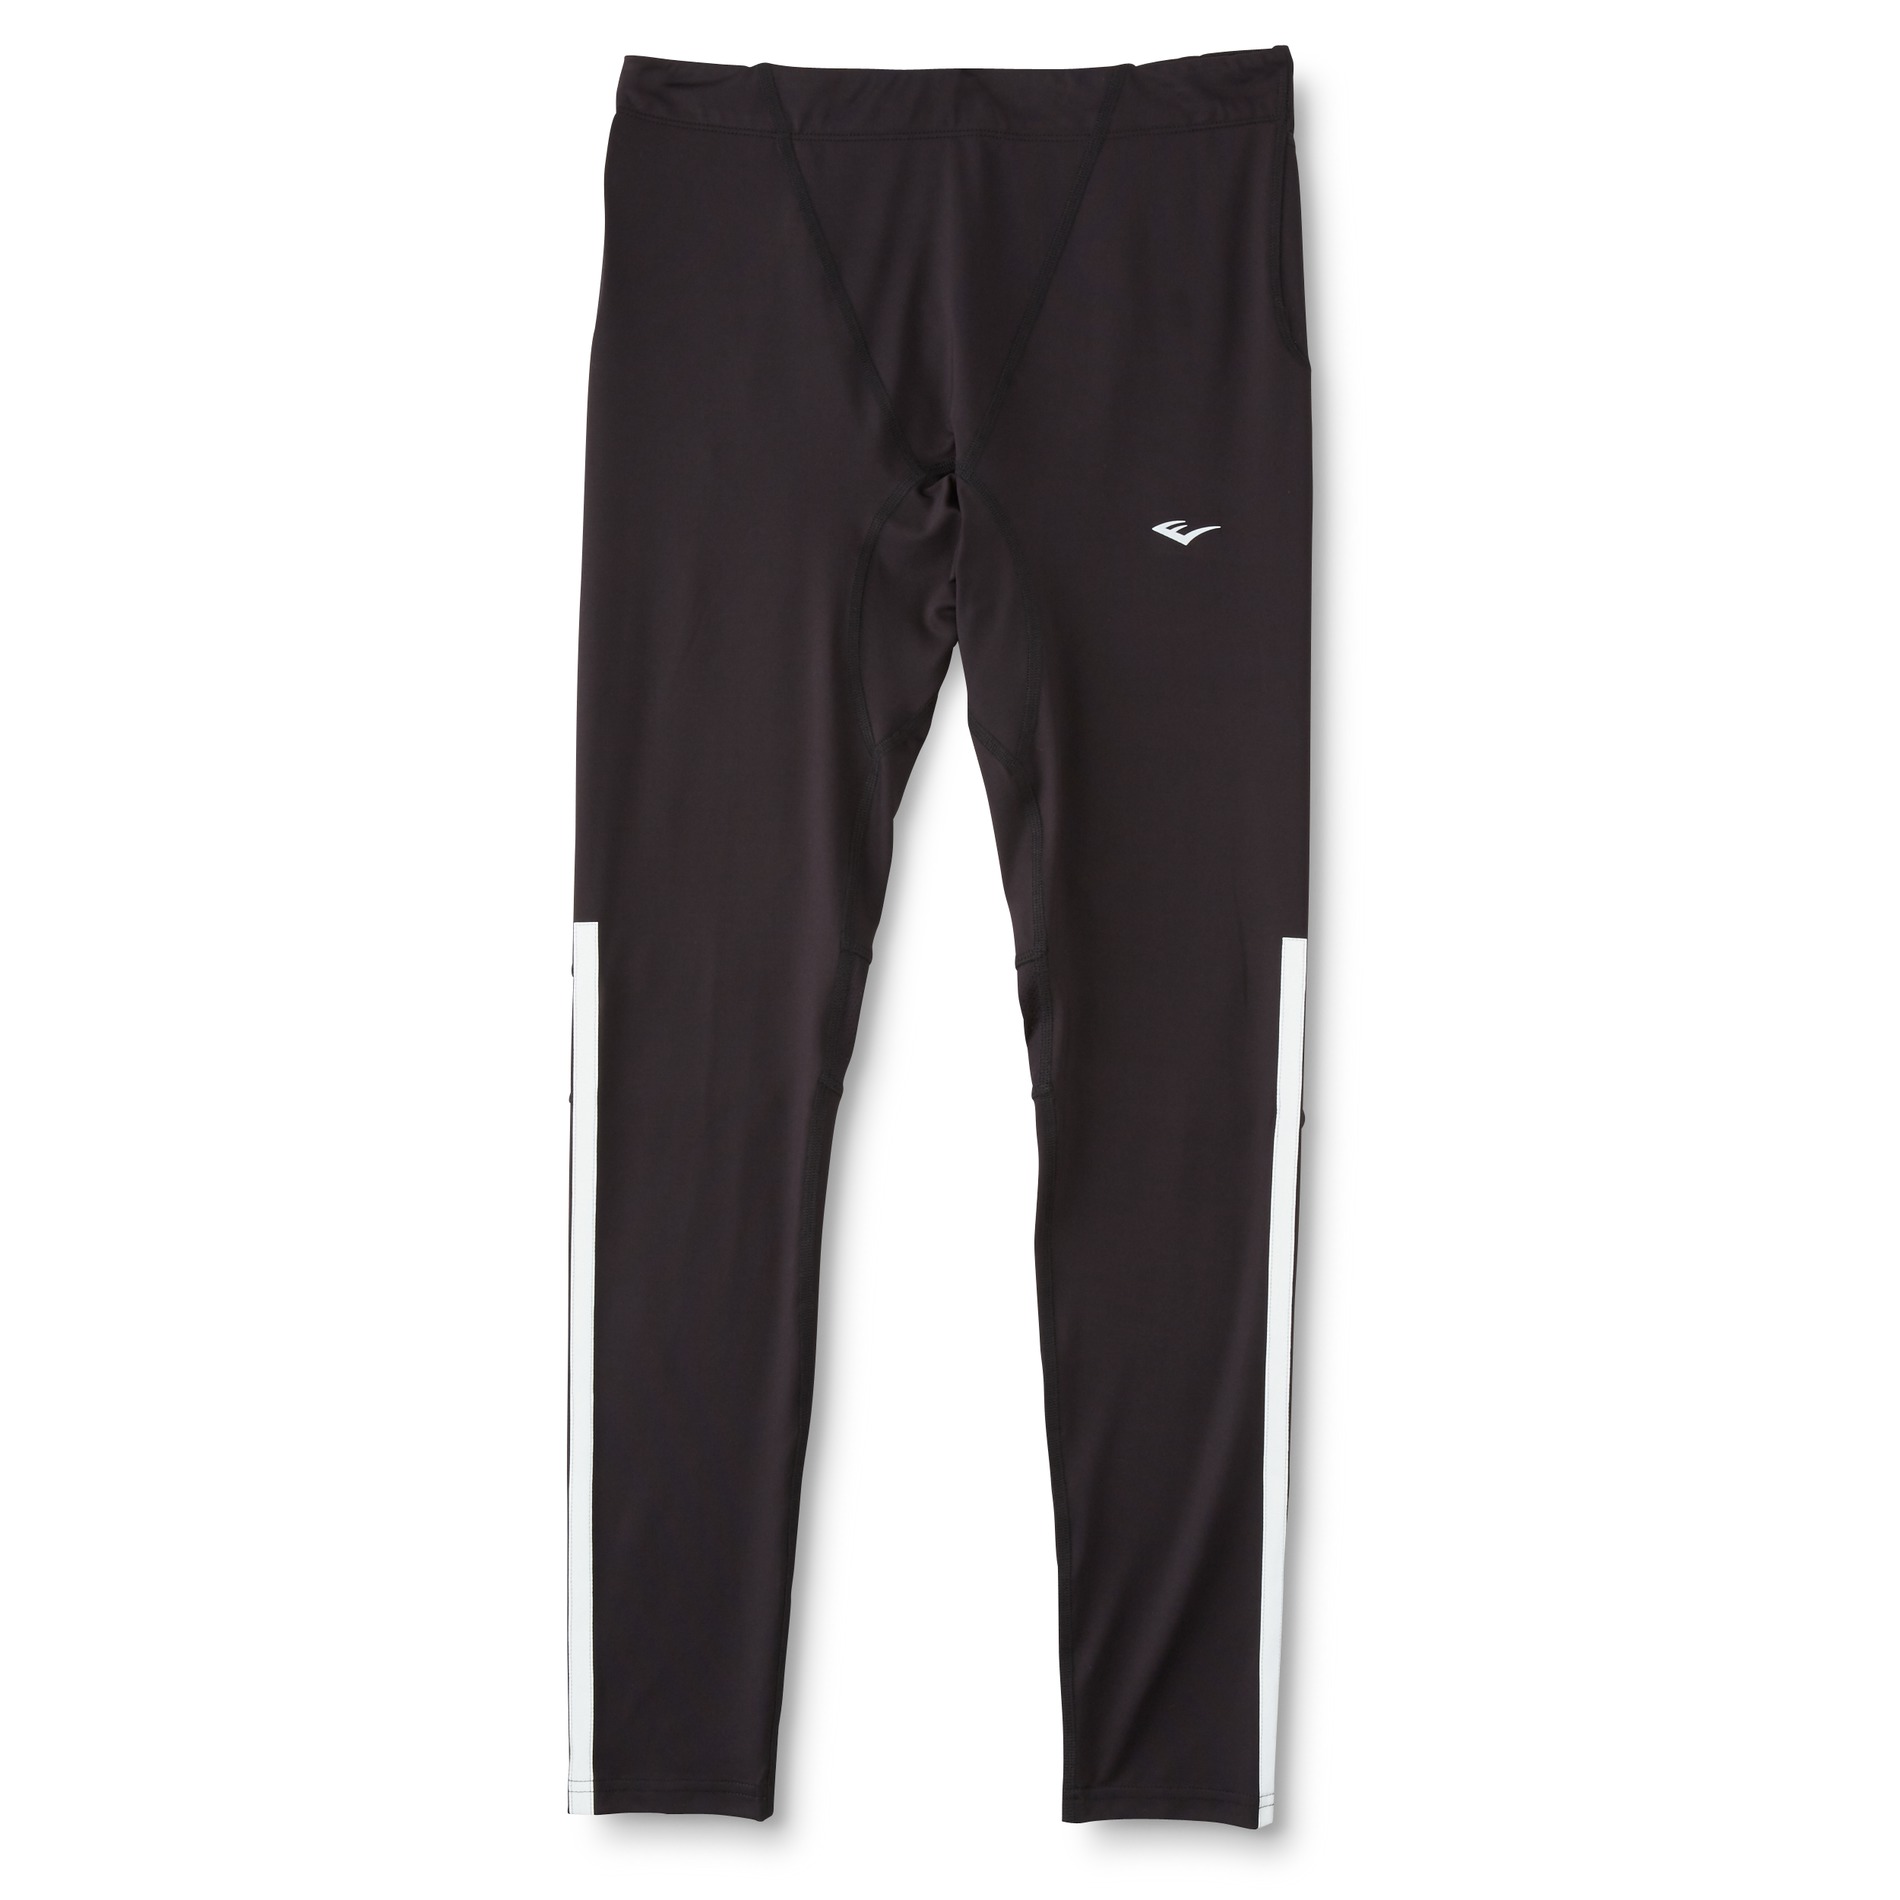 Everlast® Young Men's Athletic Performance Pants